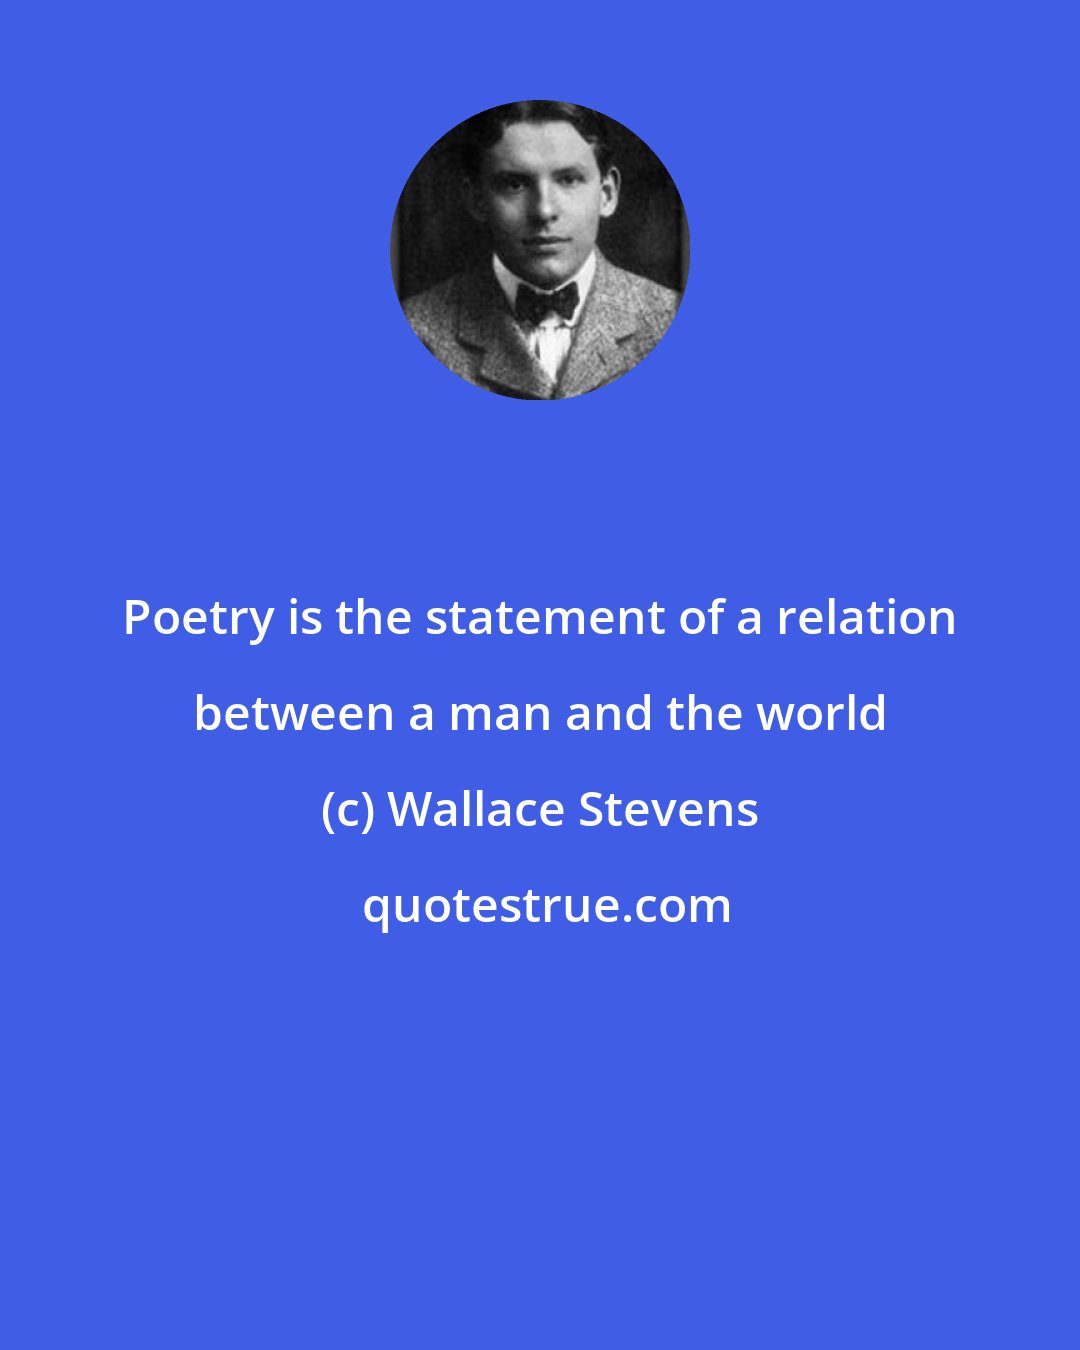 Wallace Stevens: Poetry is the statement of a relation between a man and the world